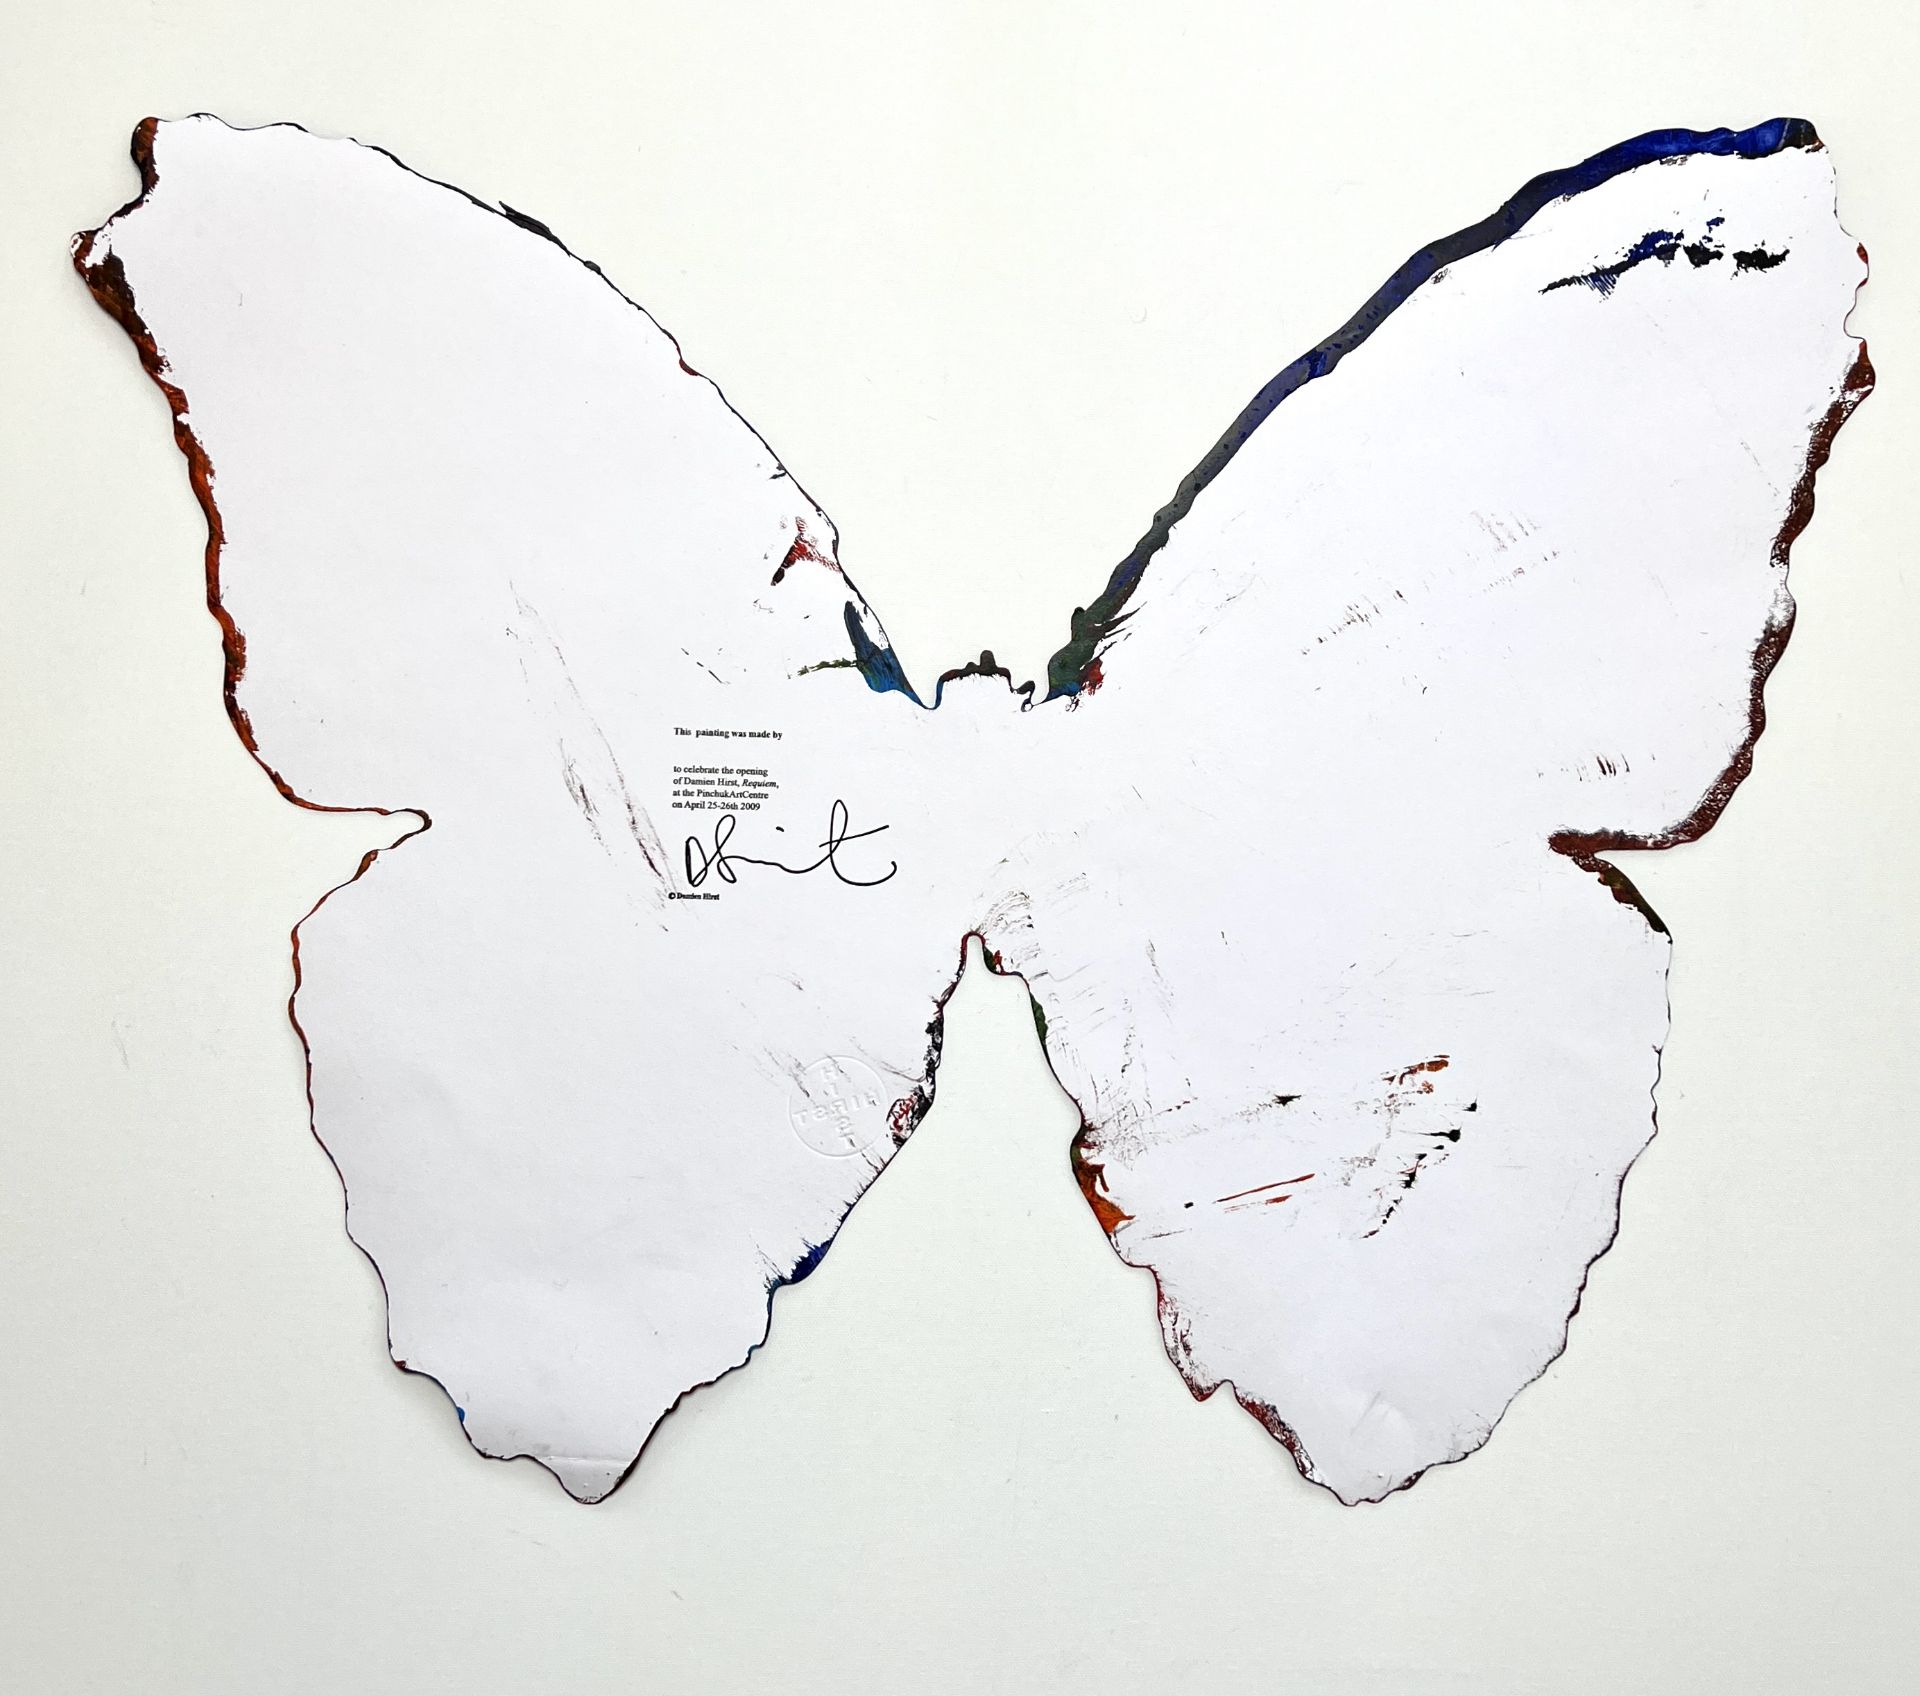 Damien Hirst. 2009. Butterfly. Spin Painting, acrylic on paper. Stamp of the signature "Hirst" on th - Image 2 of 3